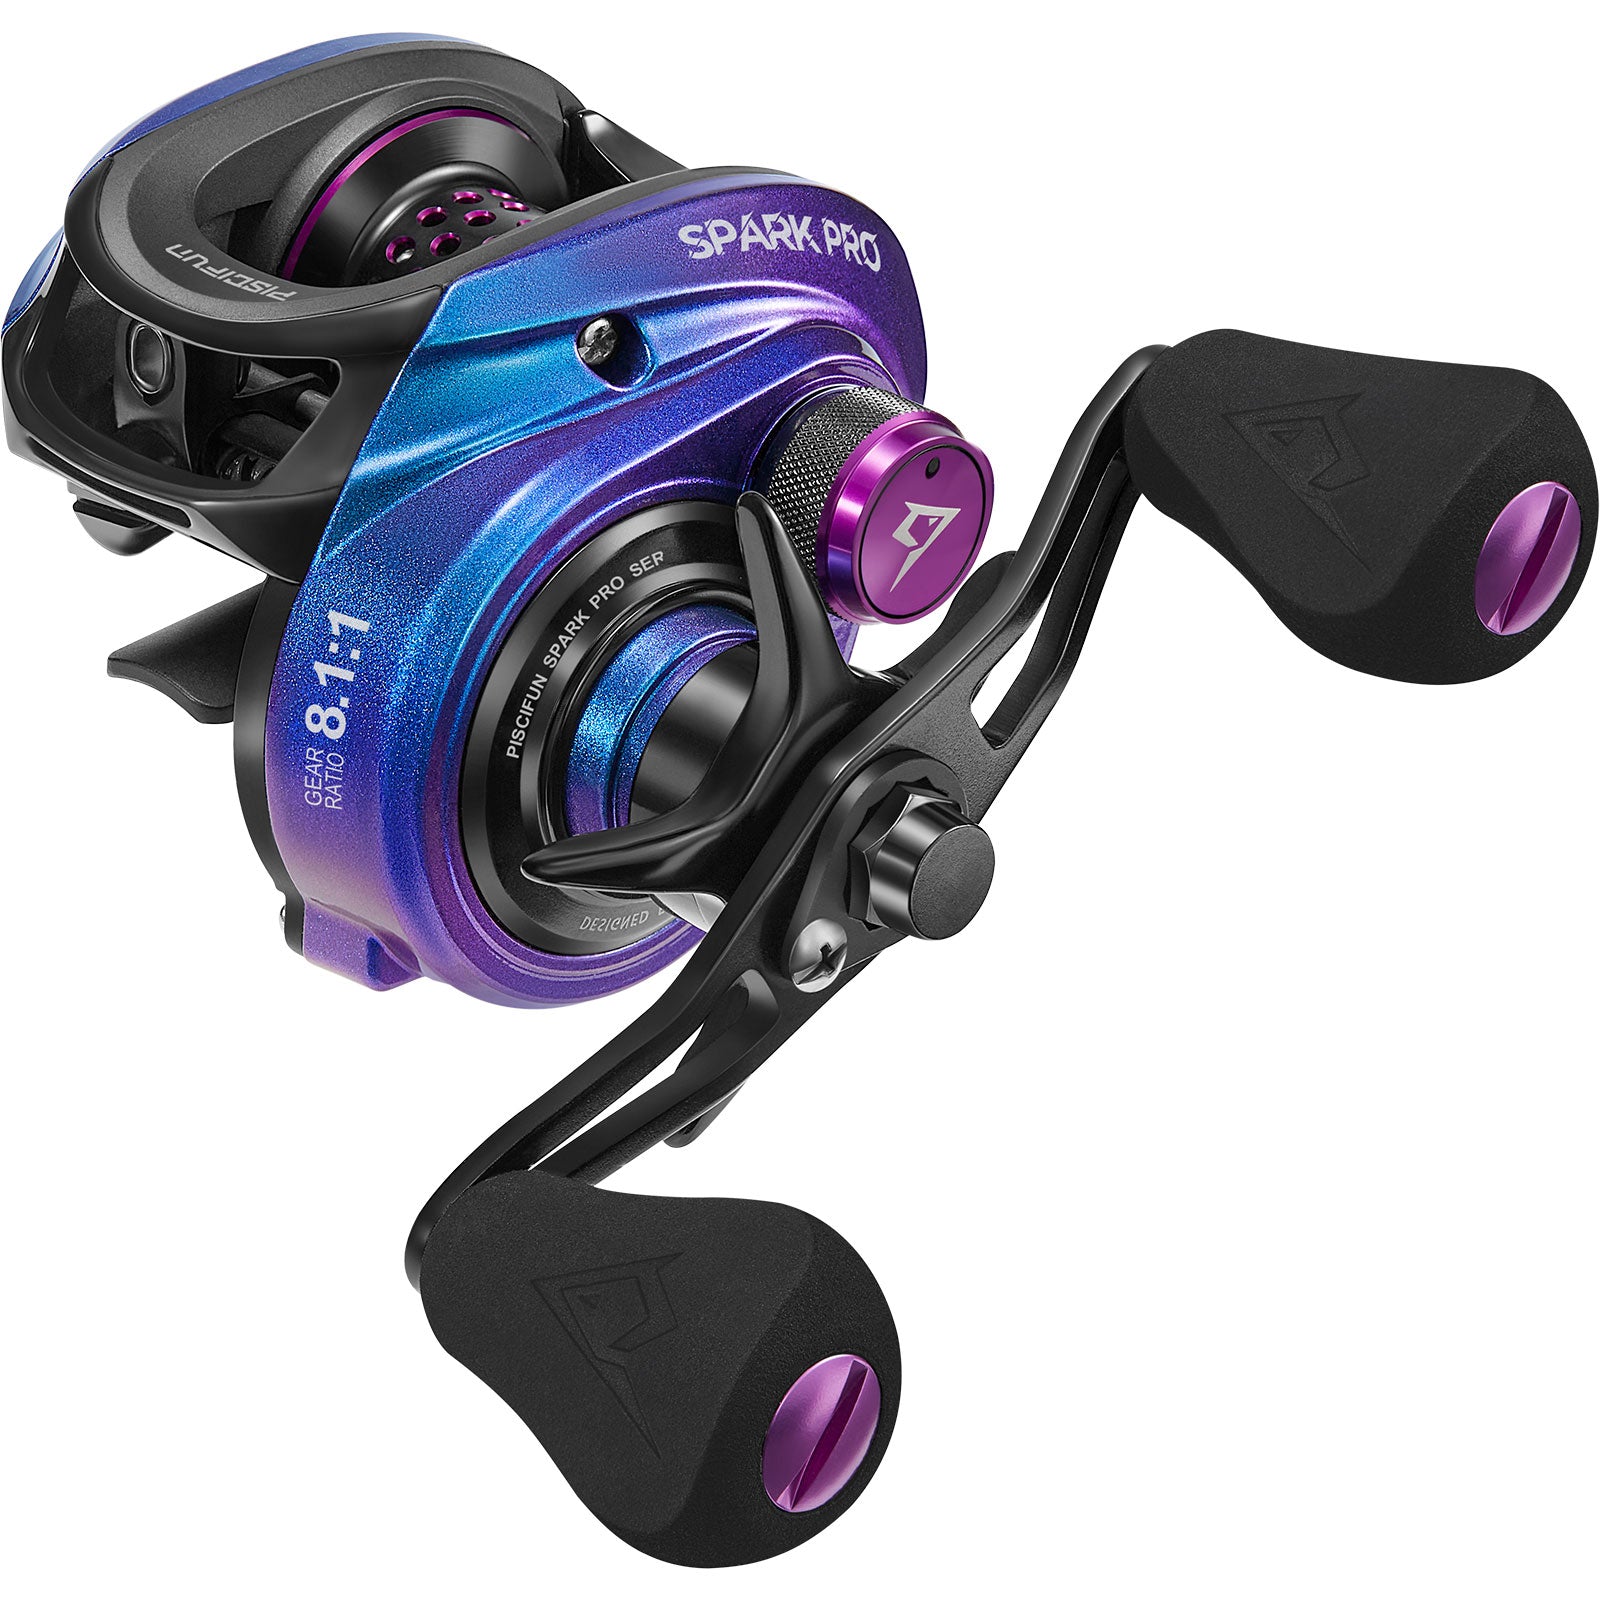 Spark Pro Colorful Baitcaster Fishing Reels | 8.1:1 / Left Hand | Piscifun